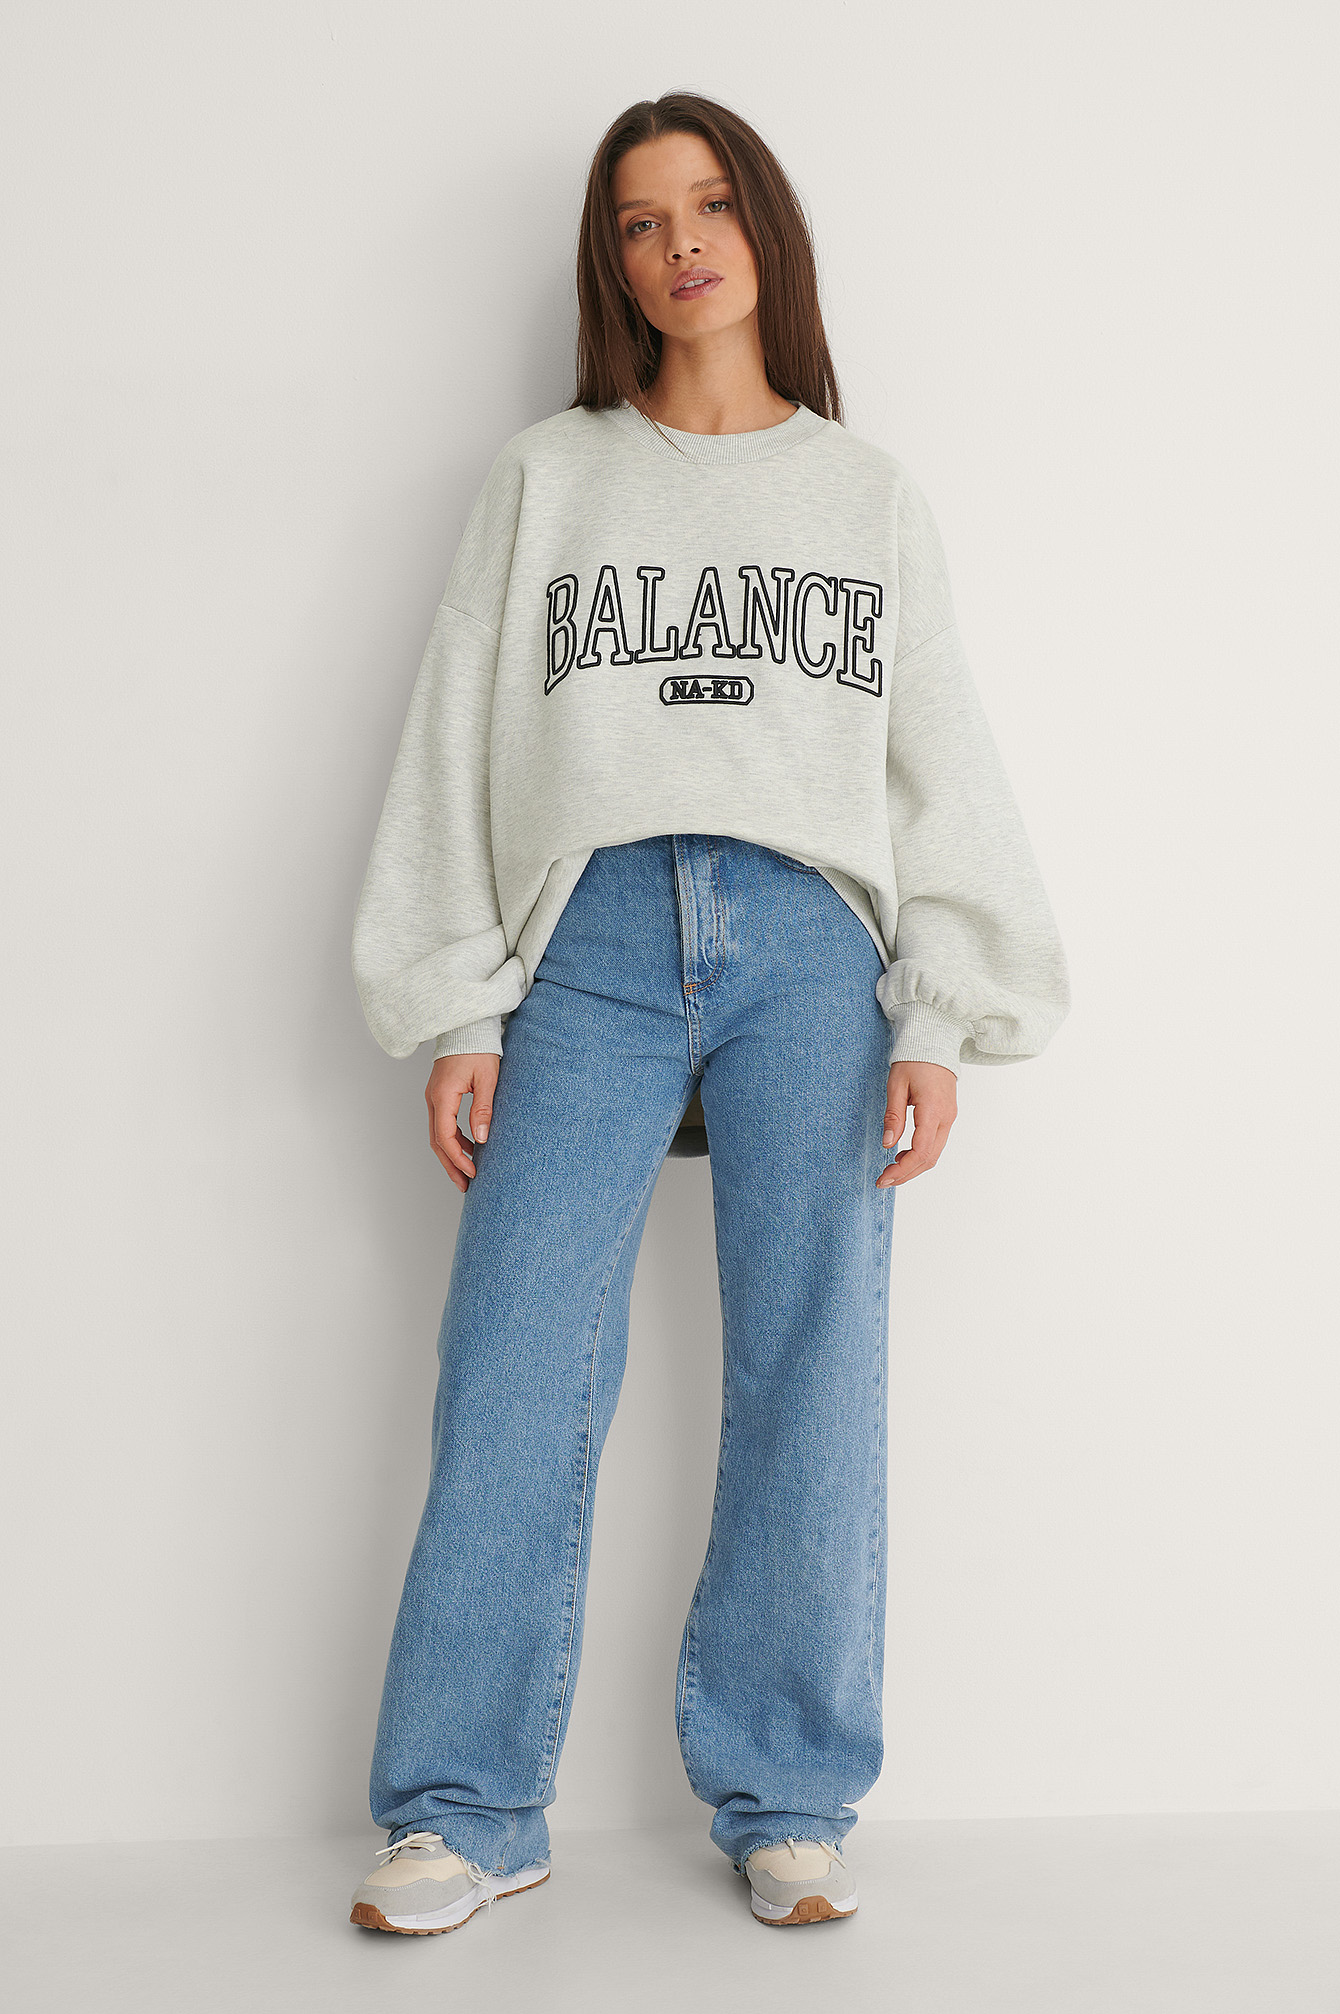 Balance Oversized Sweater Outfit.